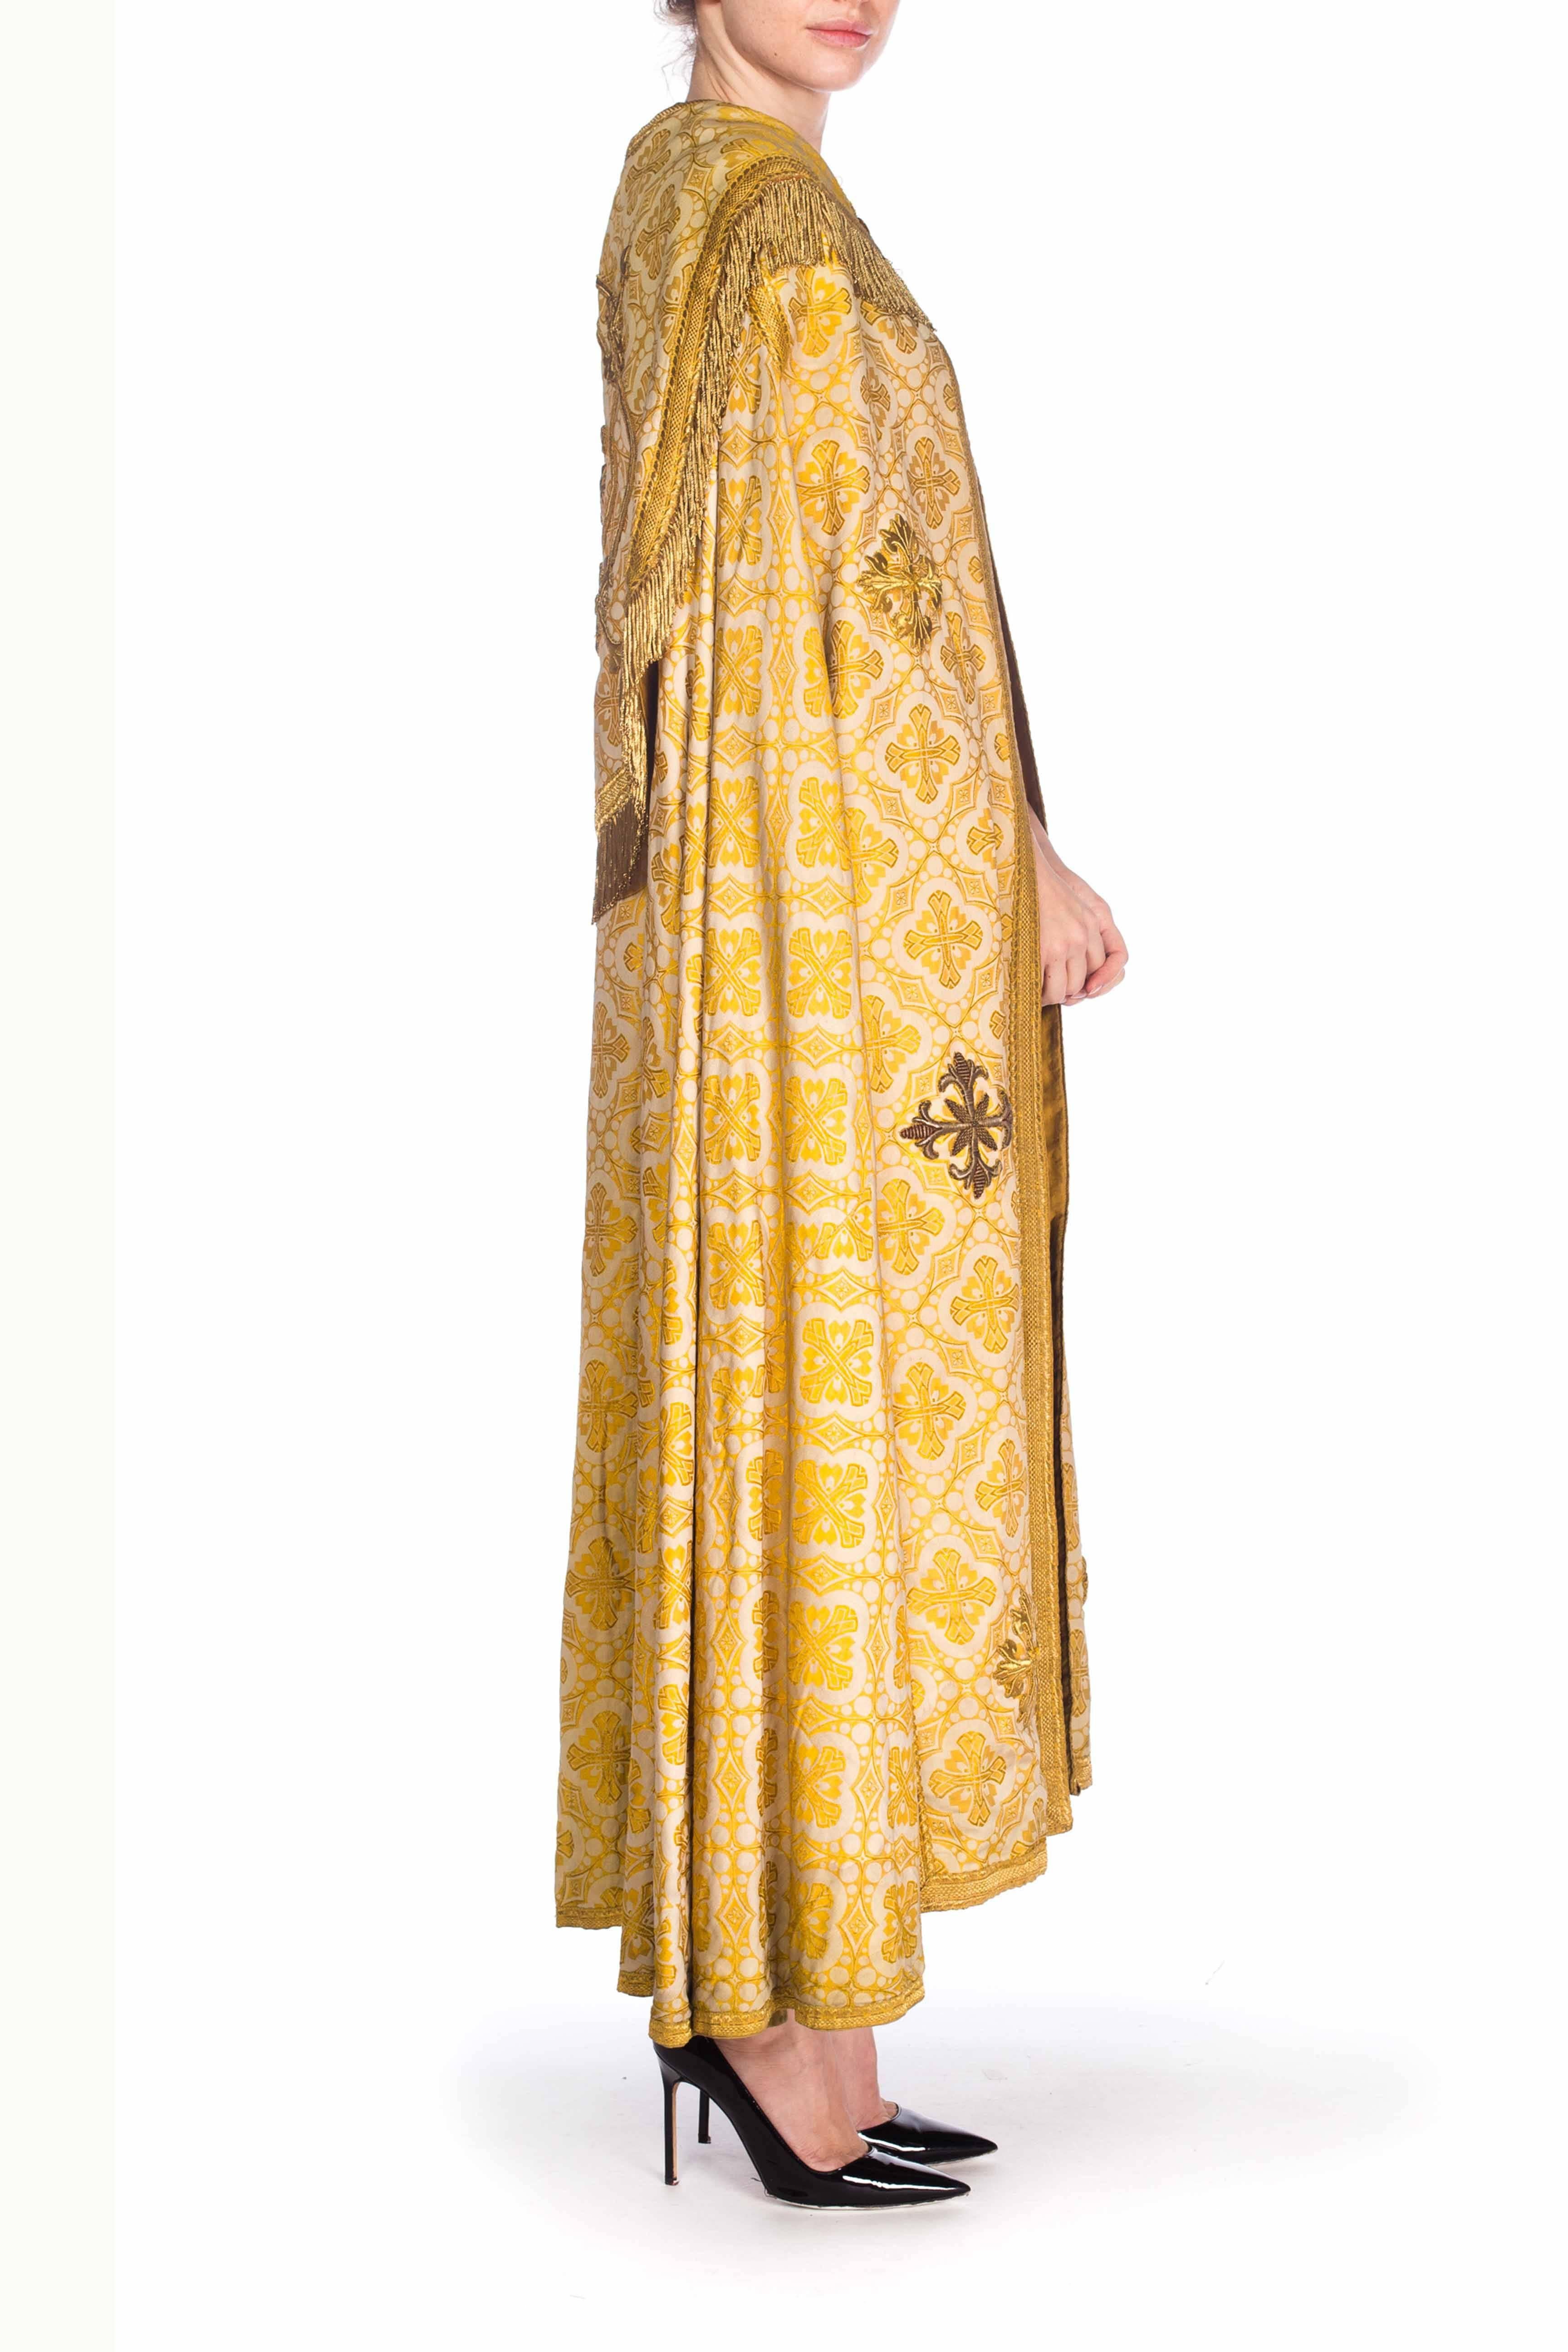 Brocade Floor Length Cape With Gold Fringe